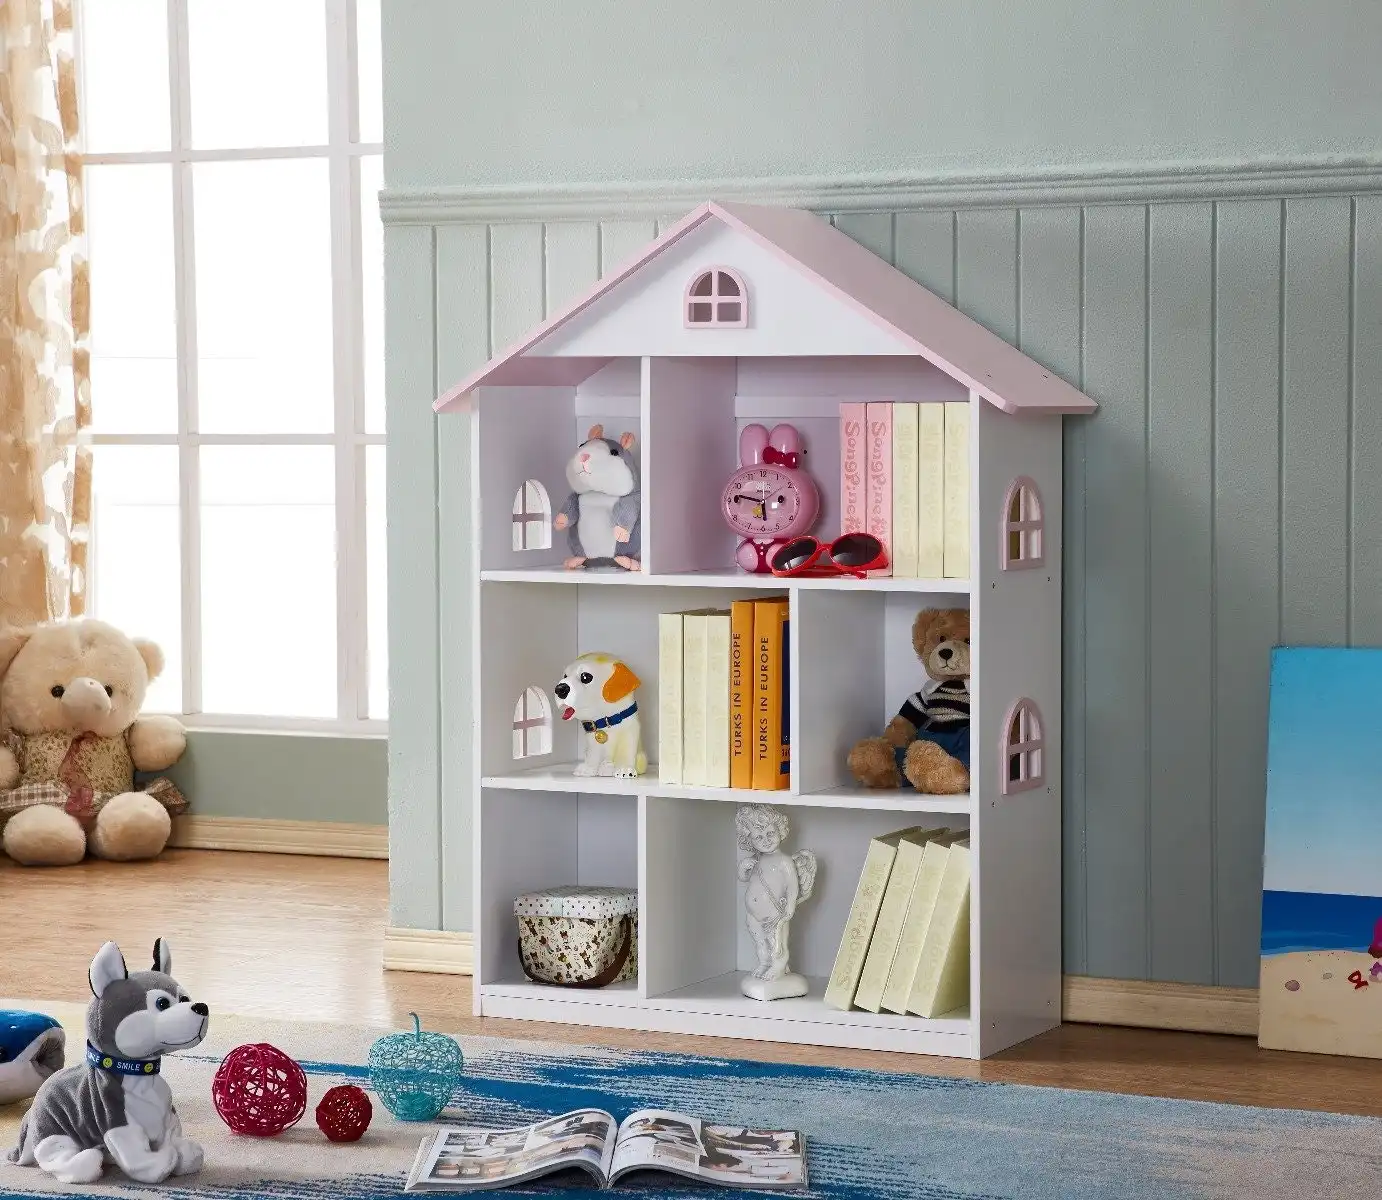 All 4 Kids Veronica Girls‘s Pink Roof Dollhouse Bookcase